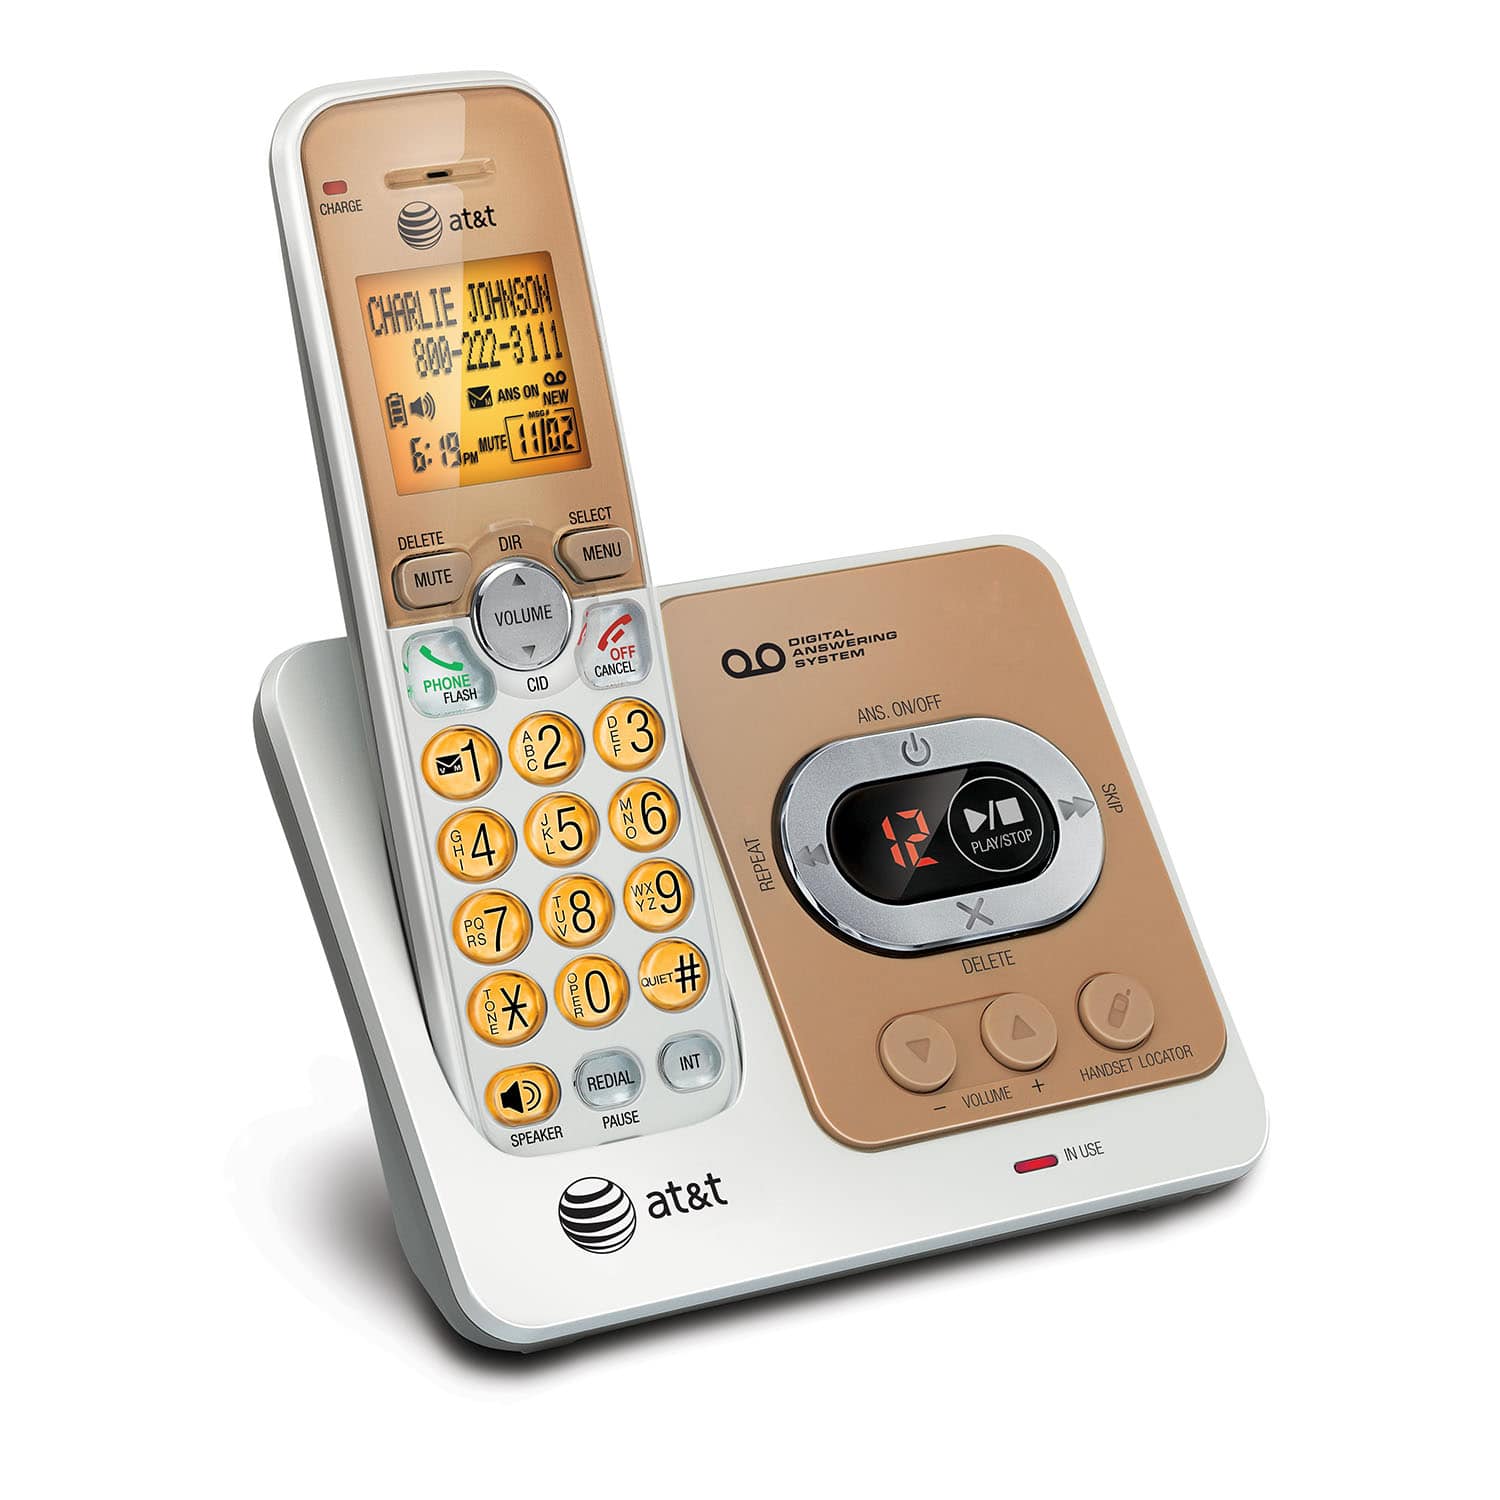 5 handset cordless answering system with caller ID/call waiting - view 2